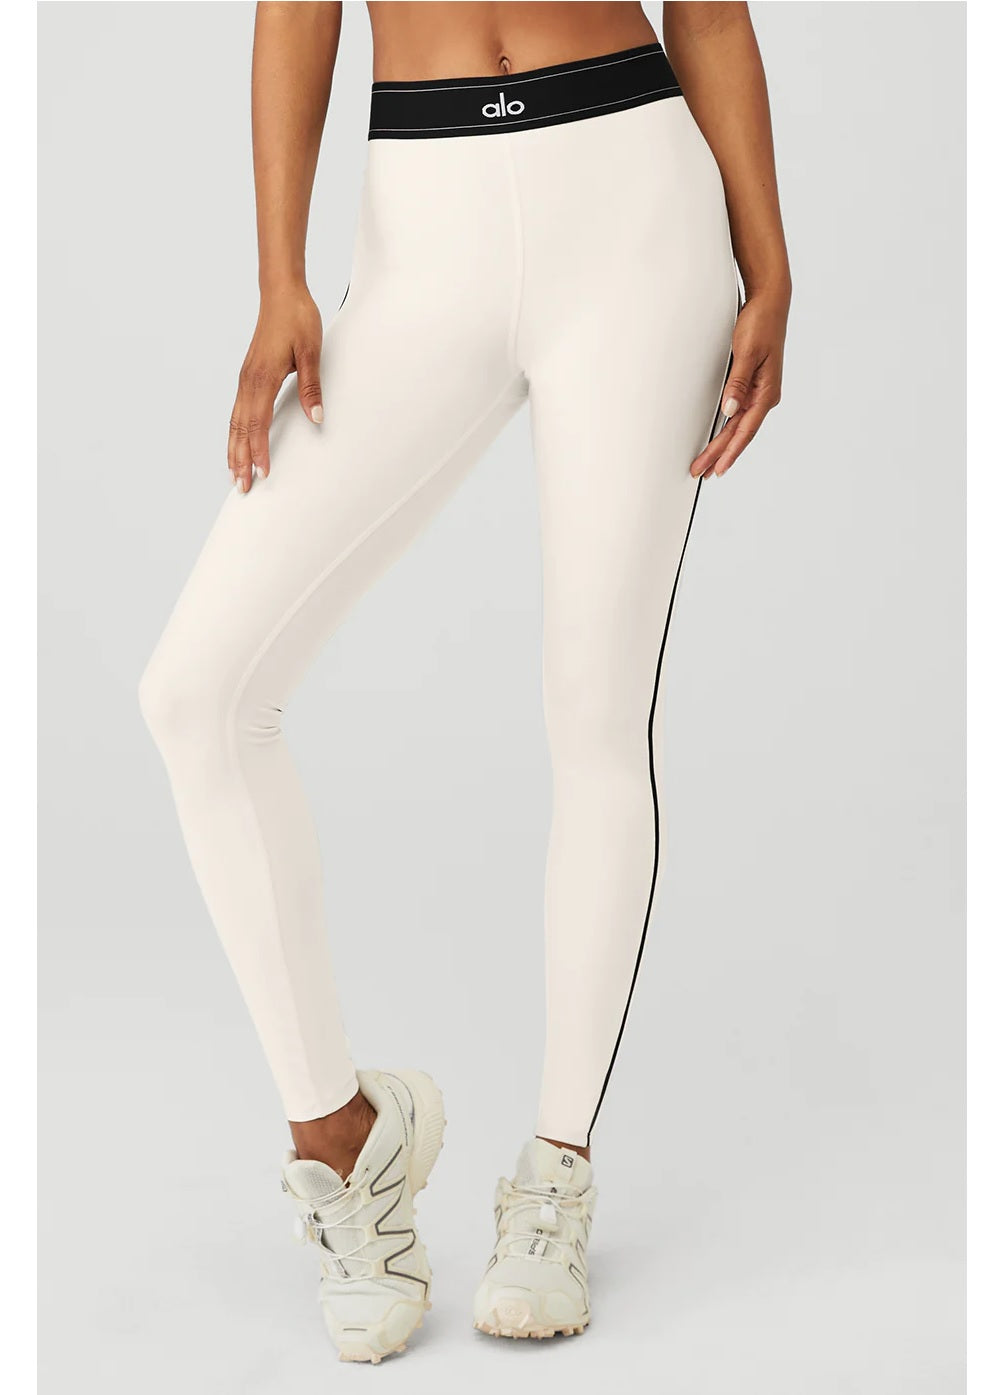 AIRLIFT HIGH-WAIST SUIT UP LEGGING — Santa Fe Trail Outfitters